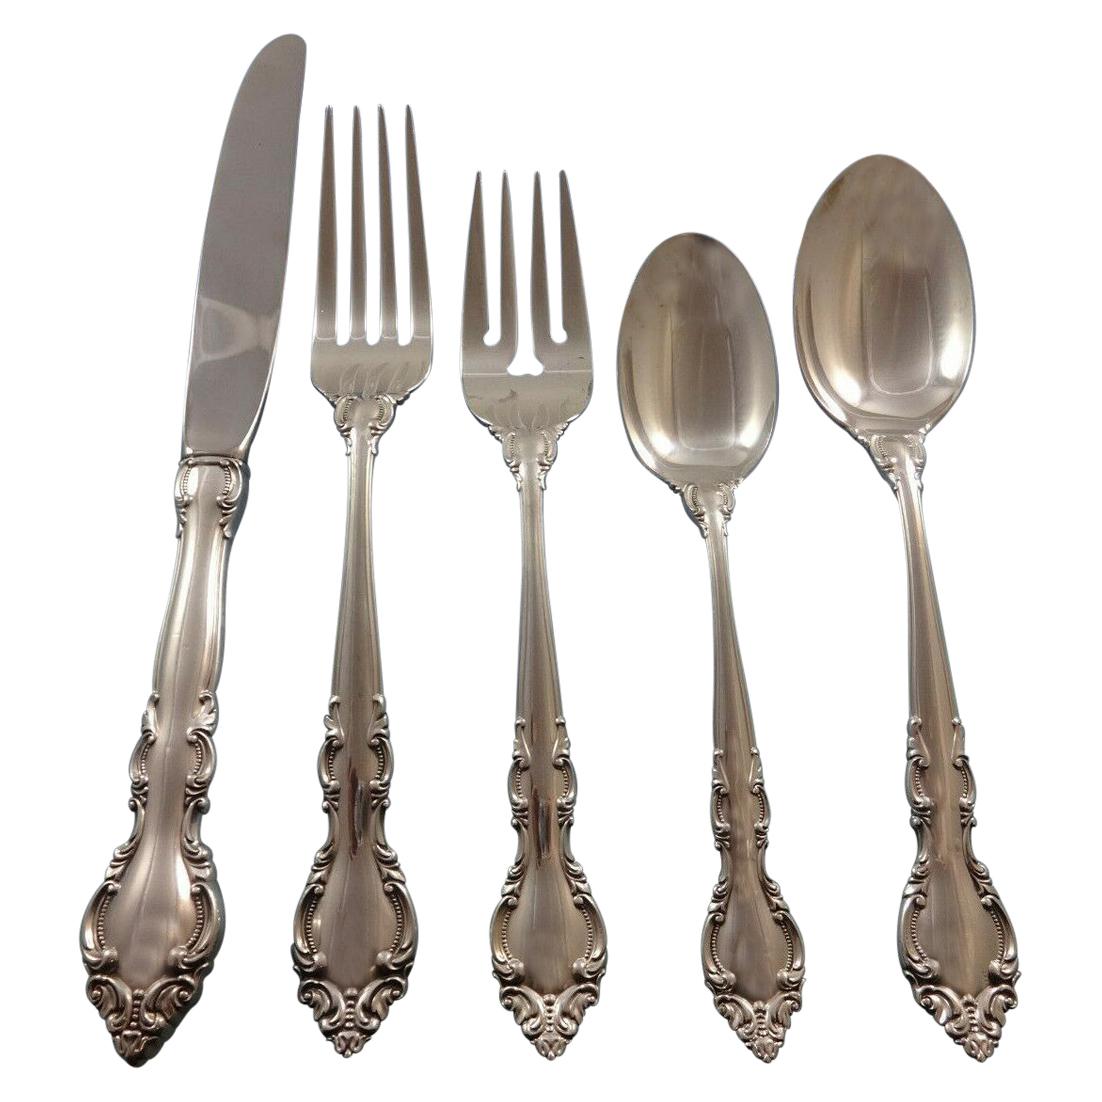 Malvern by Lunt Sterling Silver Flatware Set for 8 Service 45 Pieces